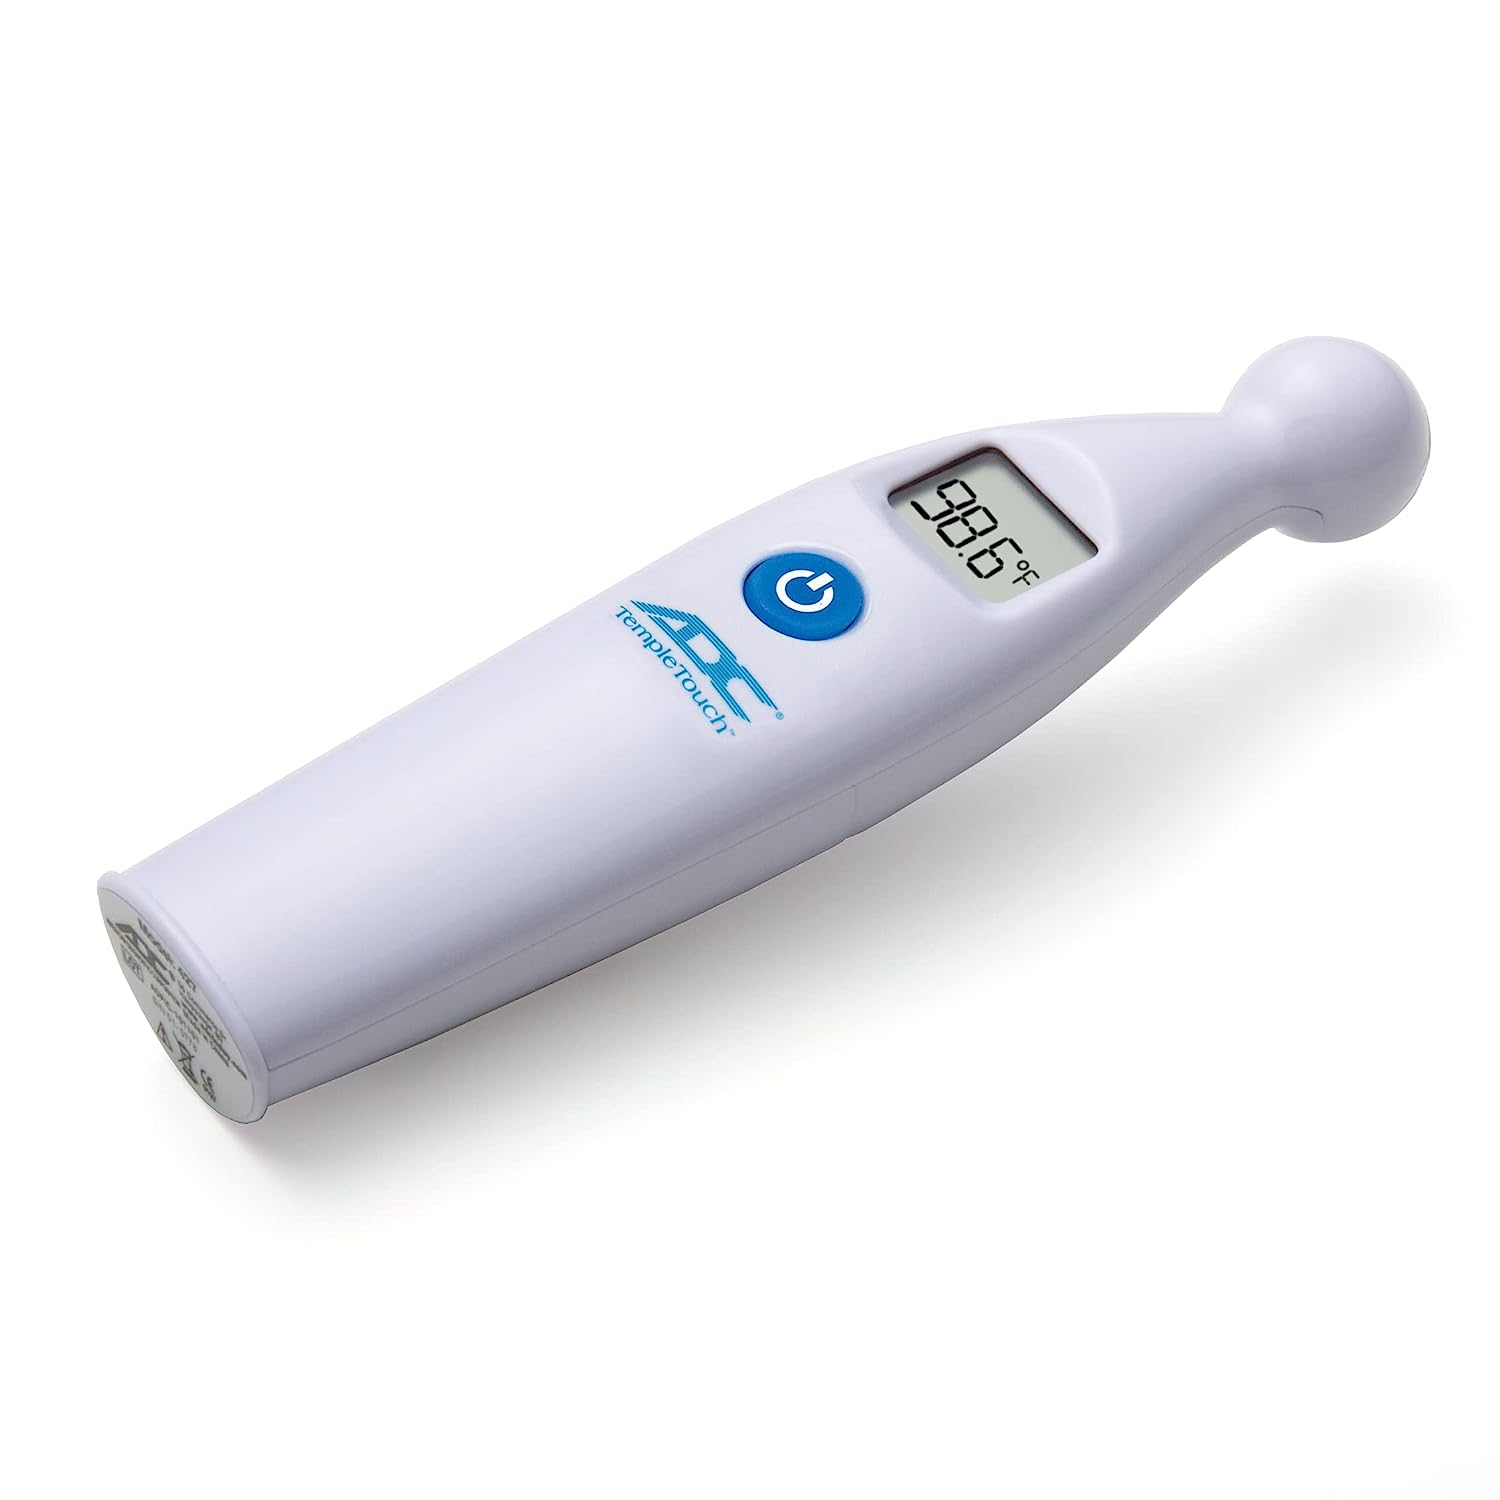 ADC Temple Touch Digital Fever Thermometer, Non [...]